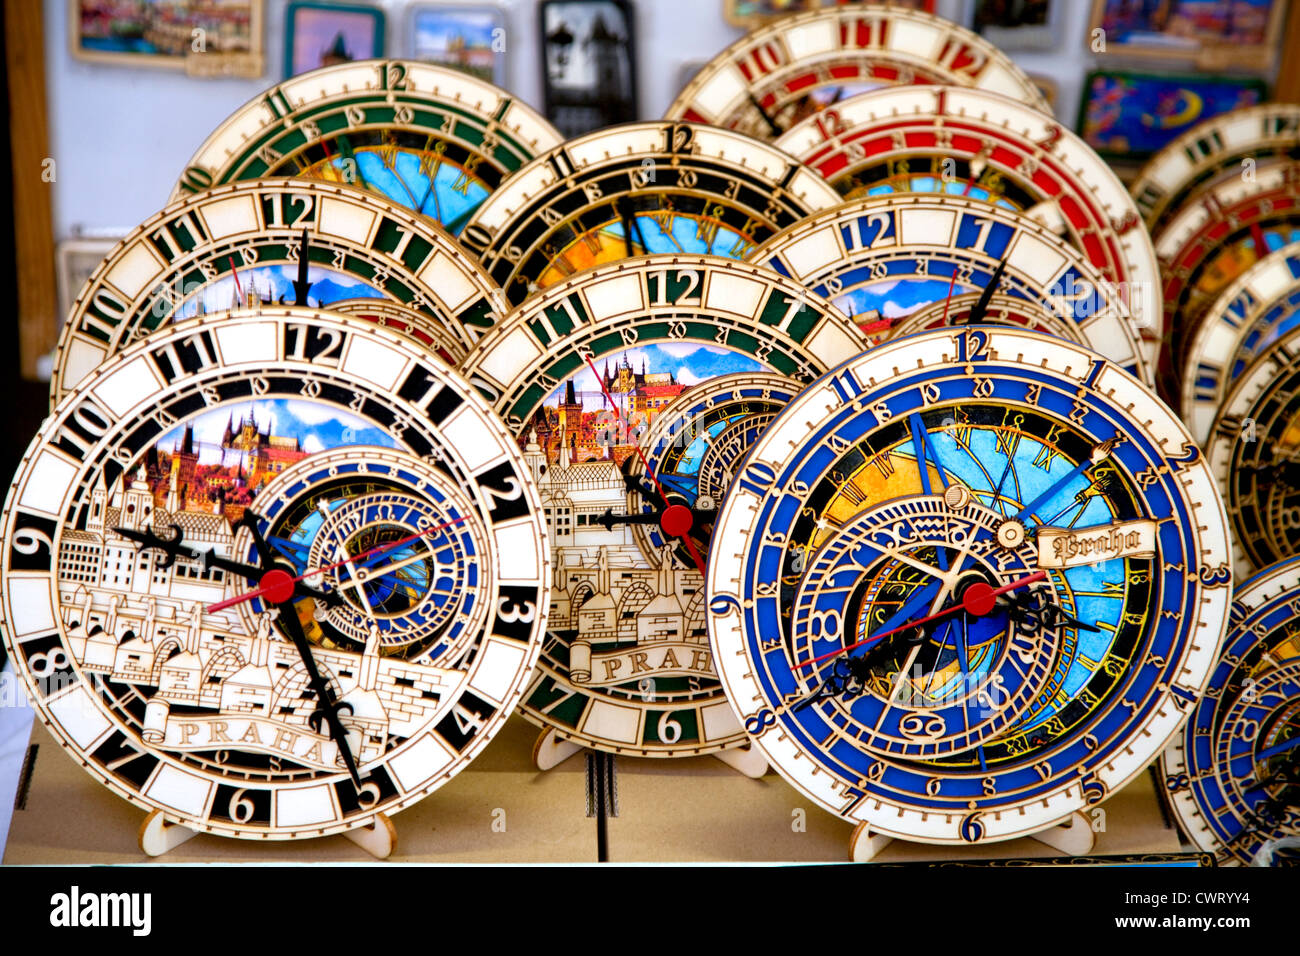 Miniatures of Prague's famed astronomical clock are sold as souvenirs in many of Prague's Old Town shops. Editorial use only. Stock Photo